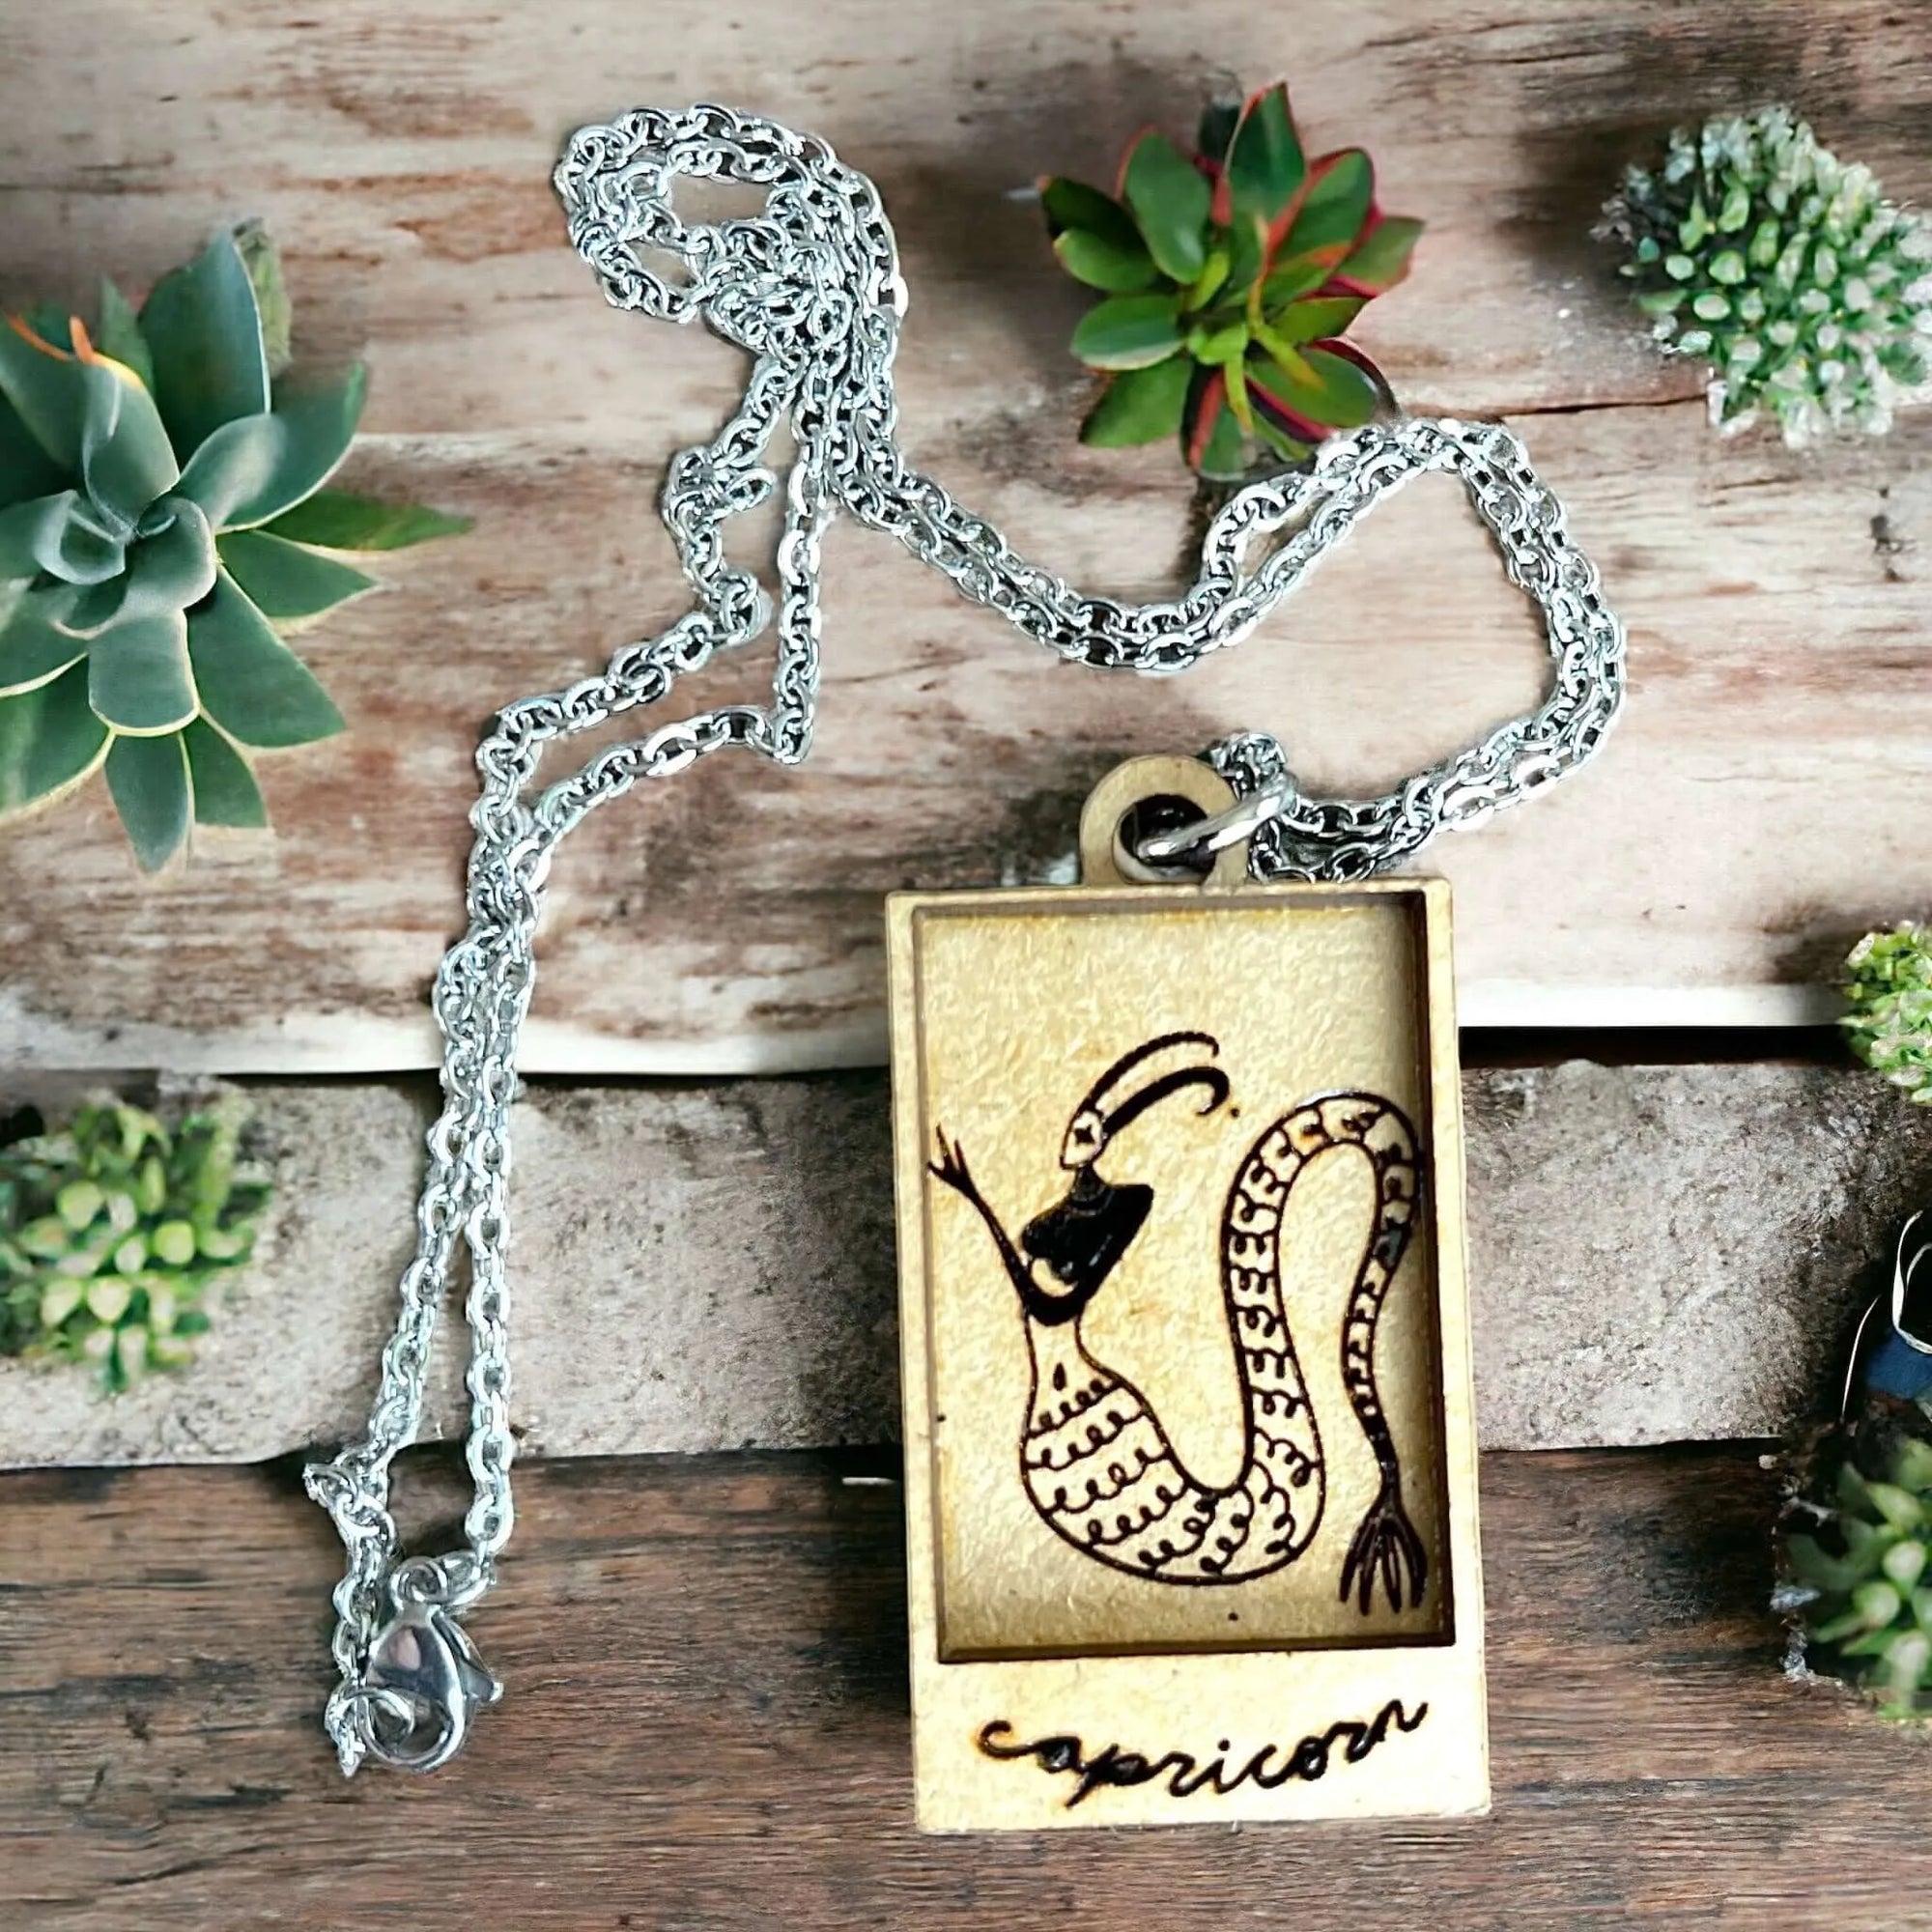 Capricorn Earth Sign Zodiac Astrology Engraved Wood Witchy Magic Pedant Necklace Jewelry 